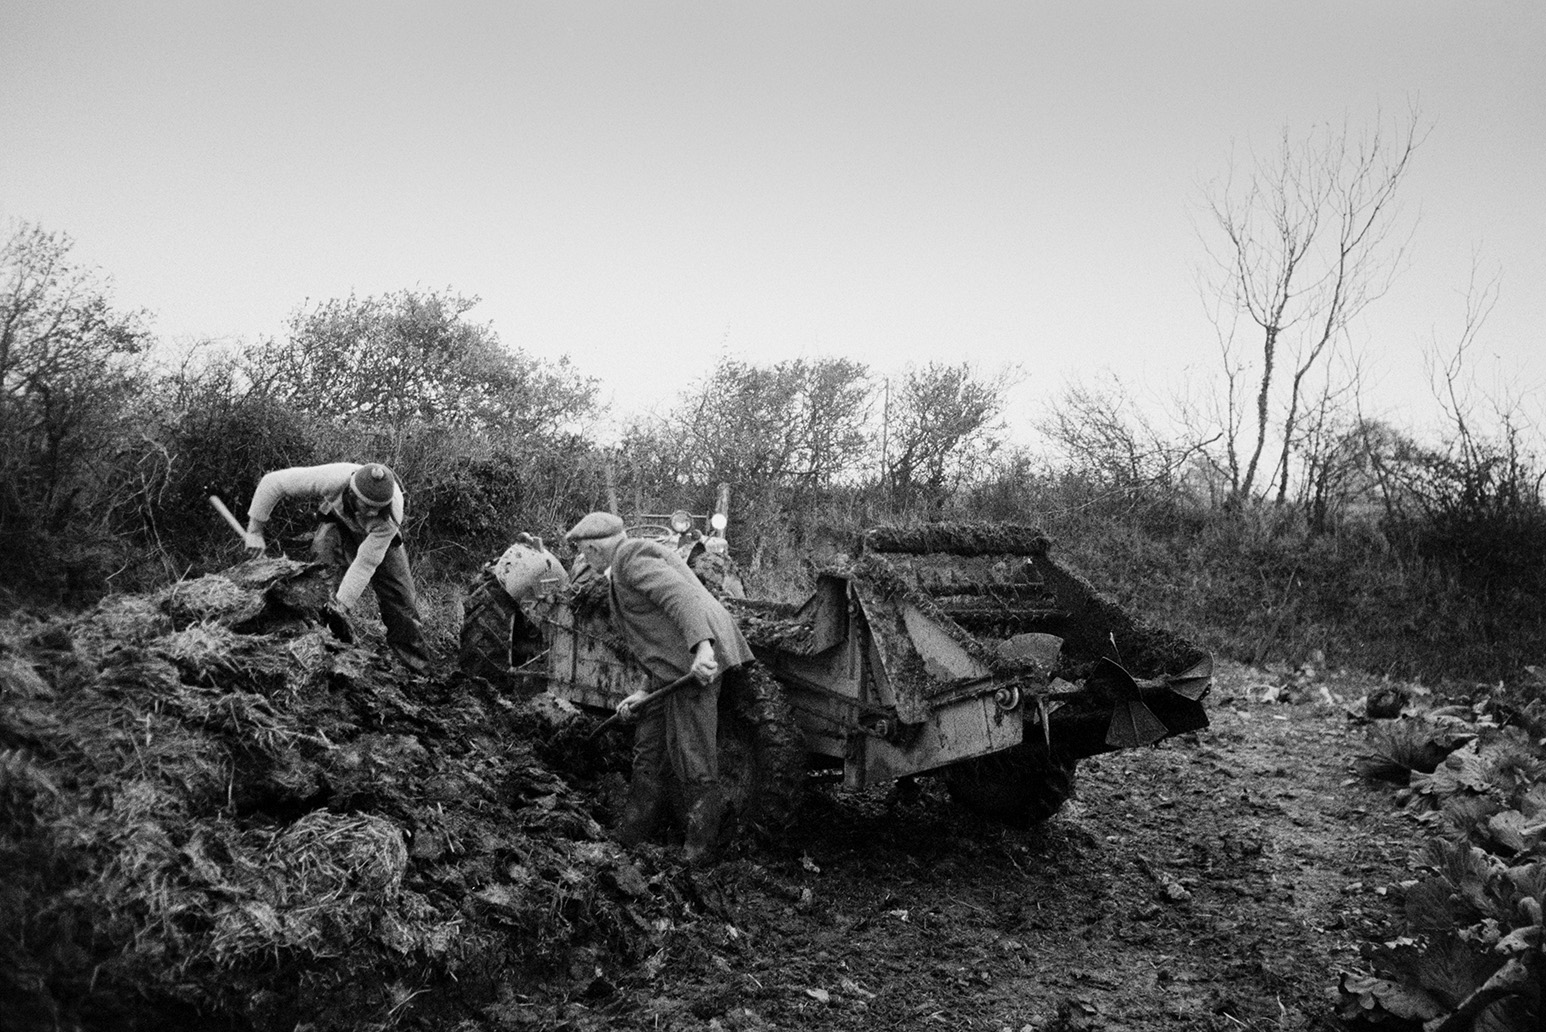 Derek Bright, on the left, and Tom Hooper shovelling manure into a muck spreader from a muck heap or dung heap, in a field at Mill Road Farm, Beaford. The farm was also known as Jeffrys.